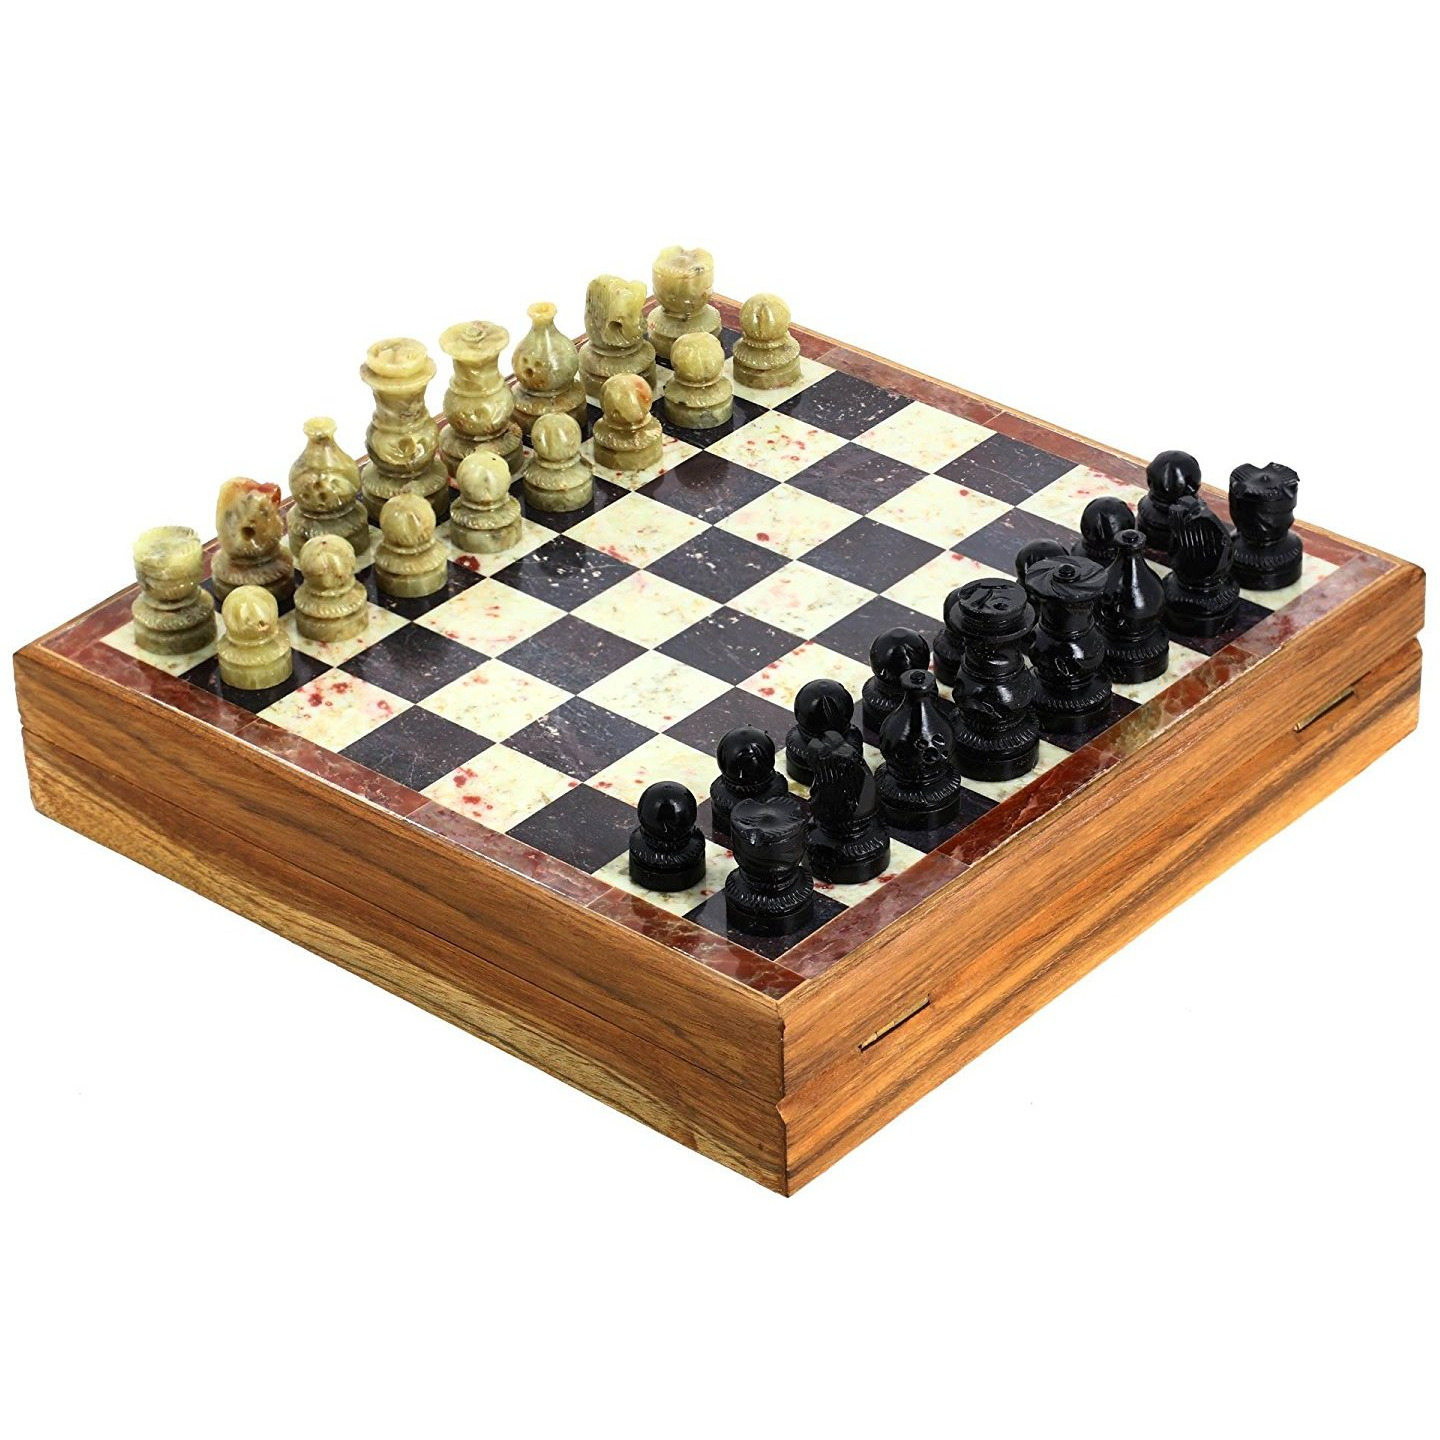 Winmaarc Rajasthan Stone Art Unique Chess Sets and Board -Indian Handmade Unique Gifts -Size 8X8 Inches